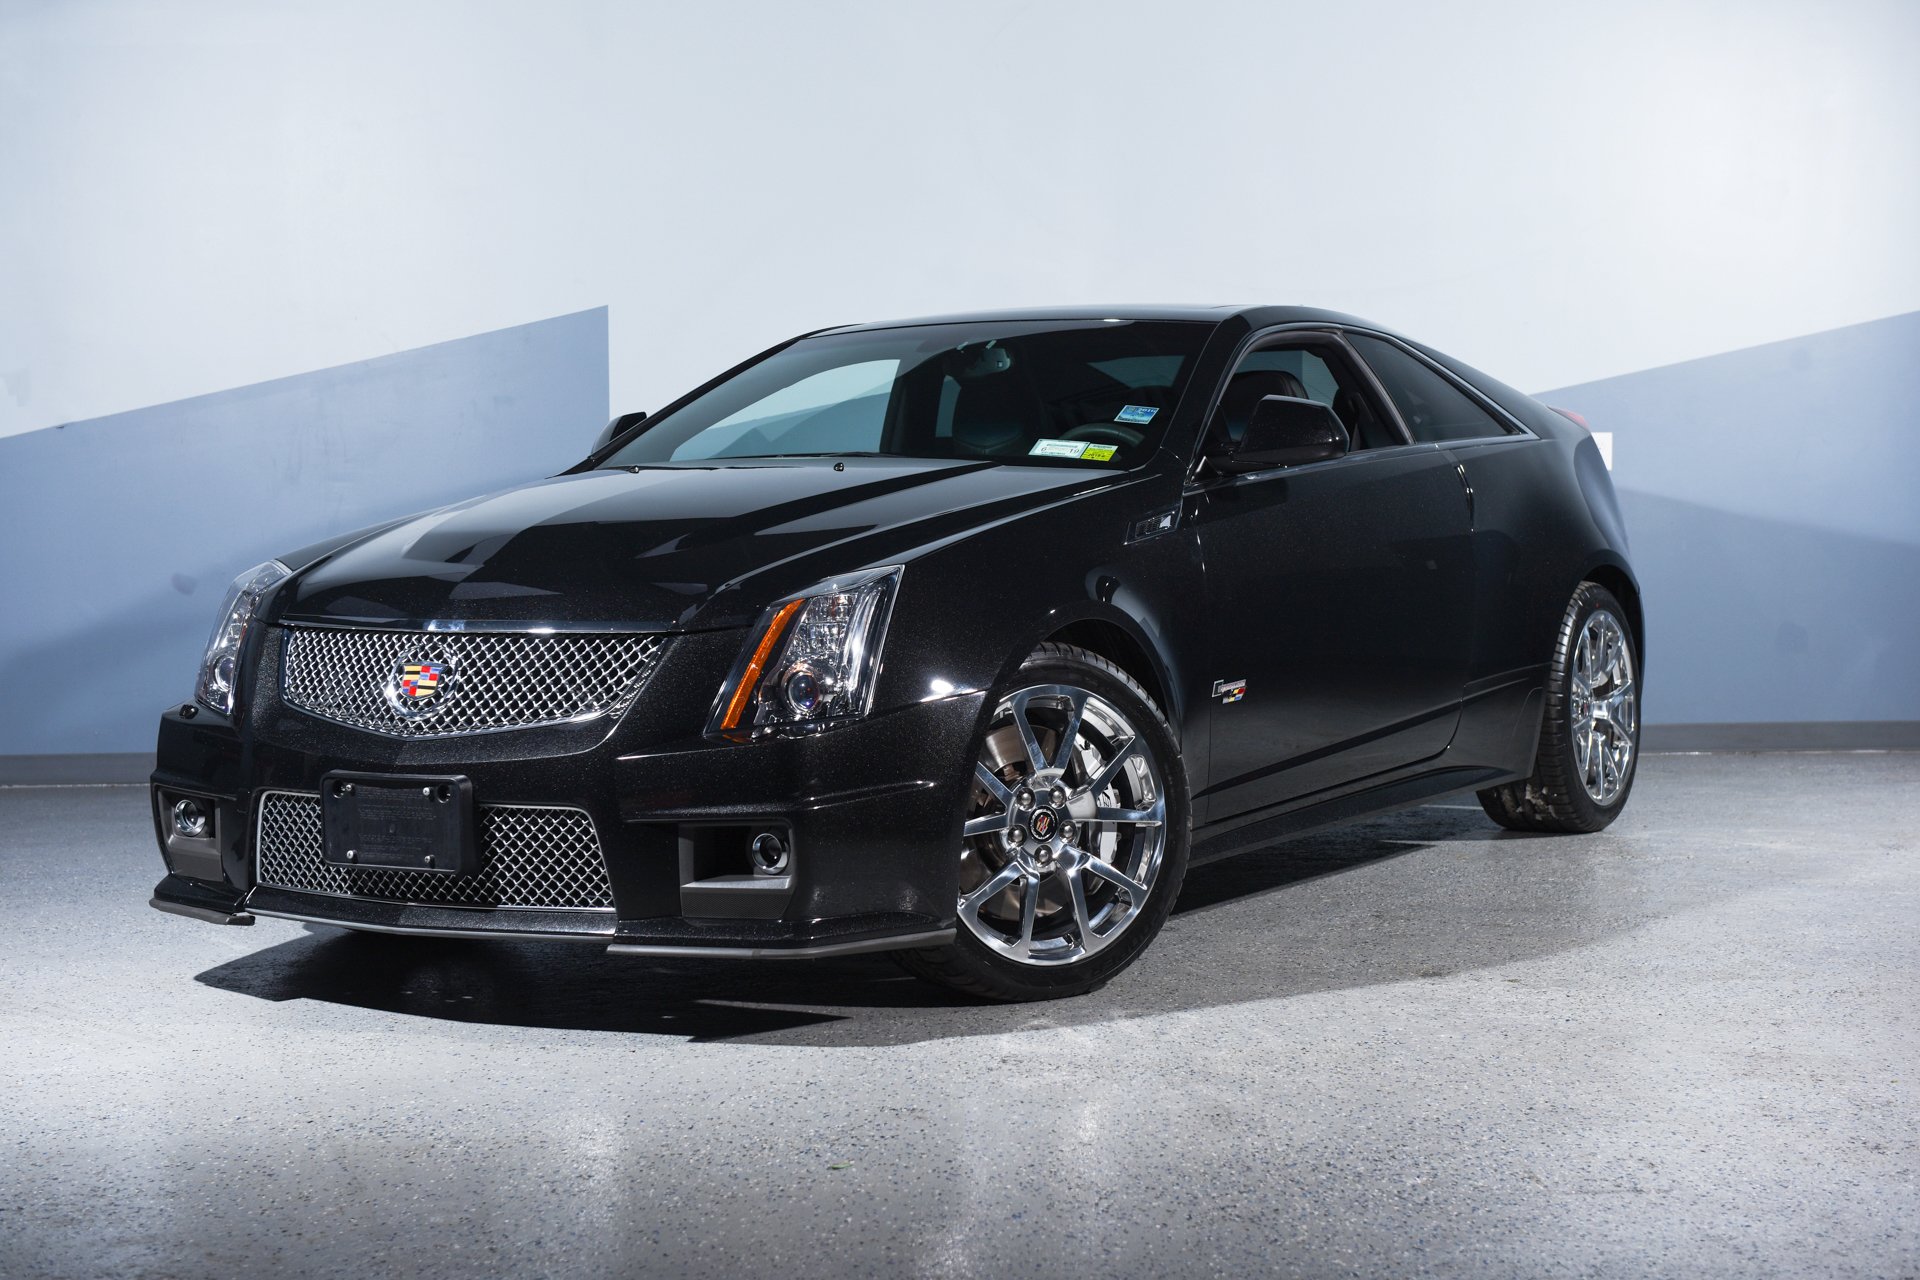 2012 Cadillac CTS-V Coupe | Imperial Motorcars